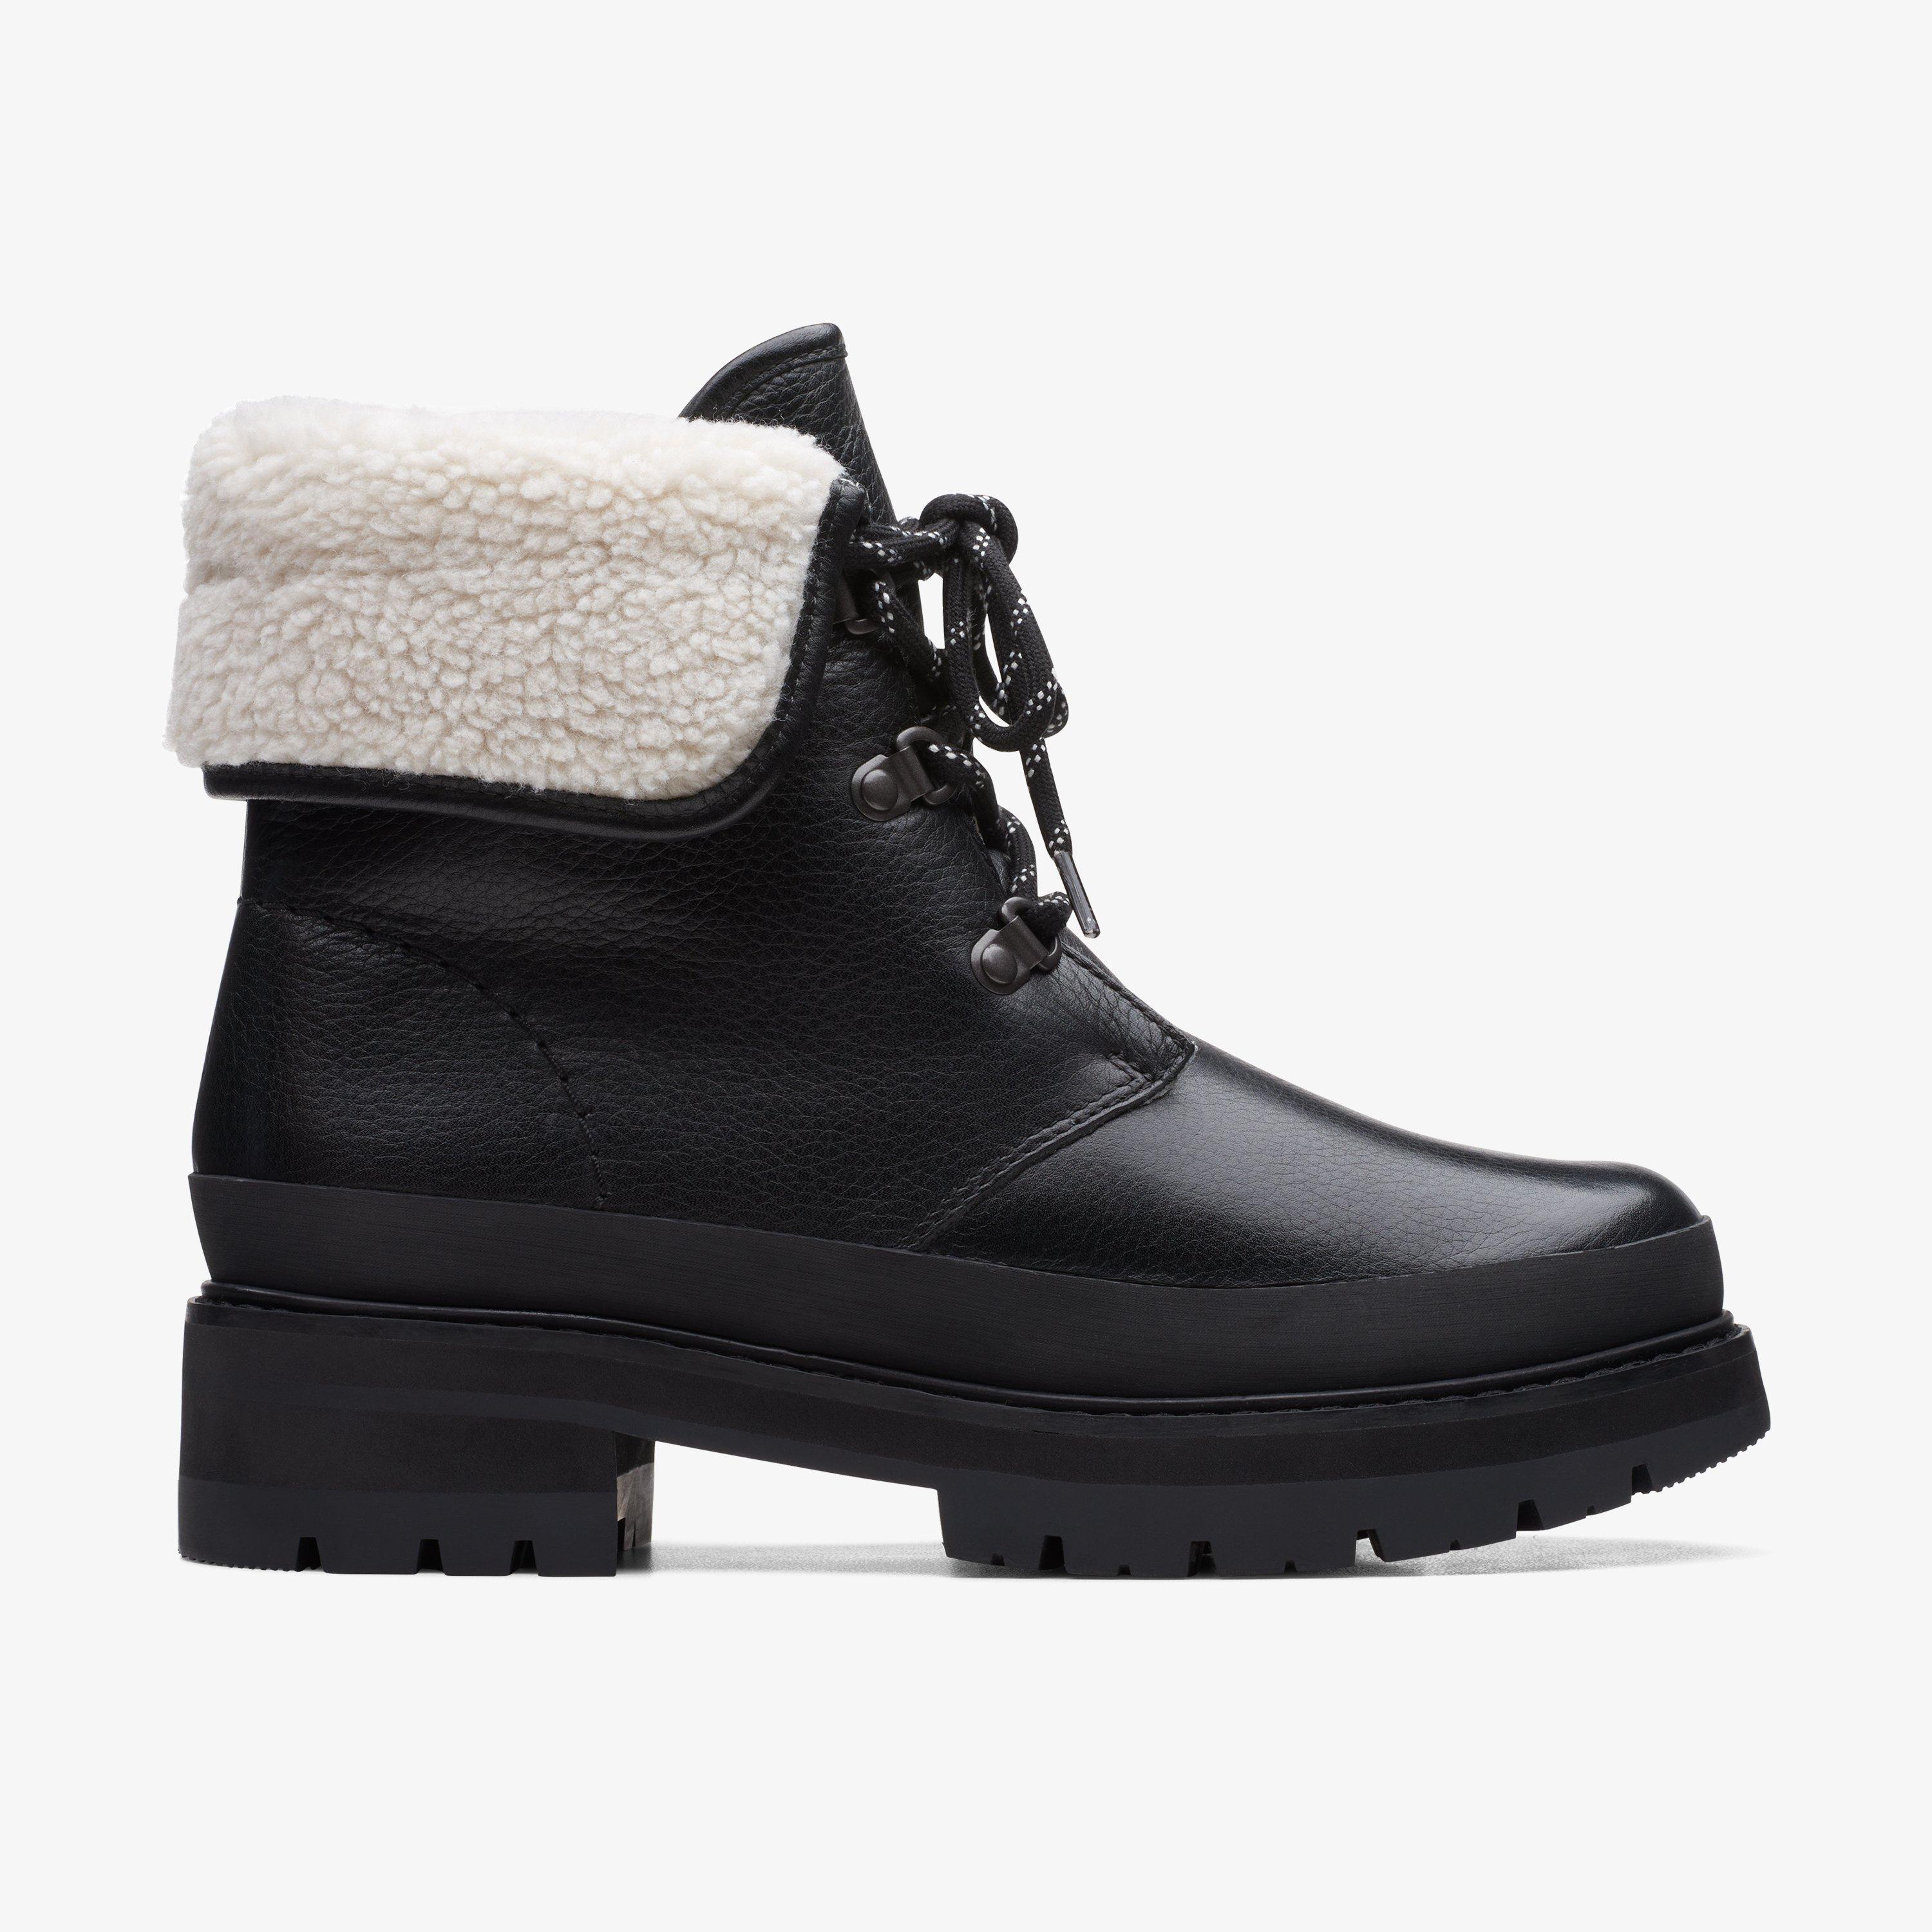 Womens Orianna Turn Black Warmlined Leather Ankle Boots | Clarks UK